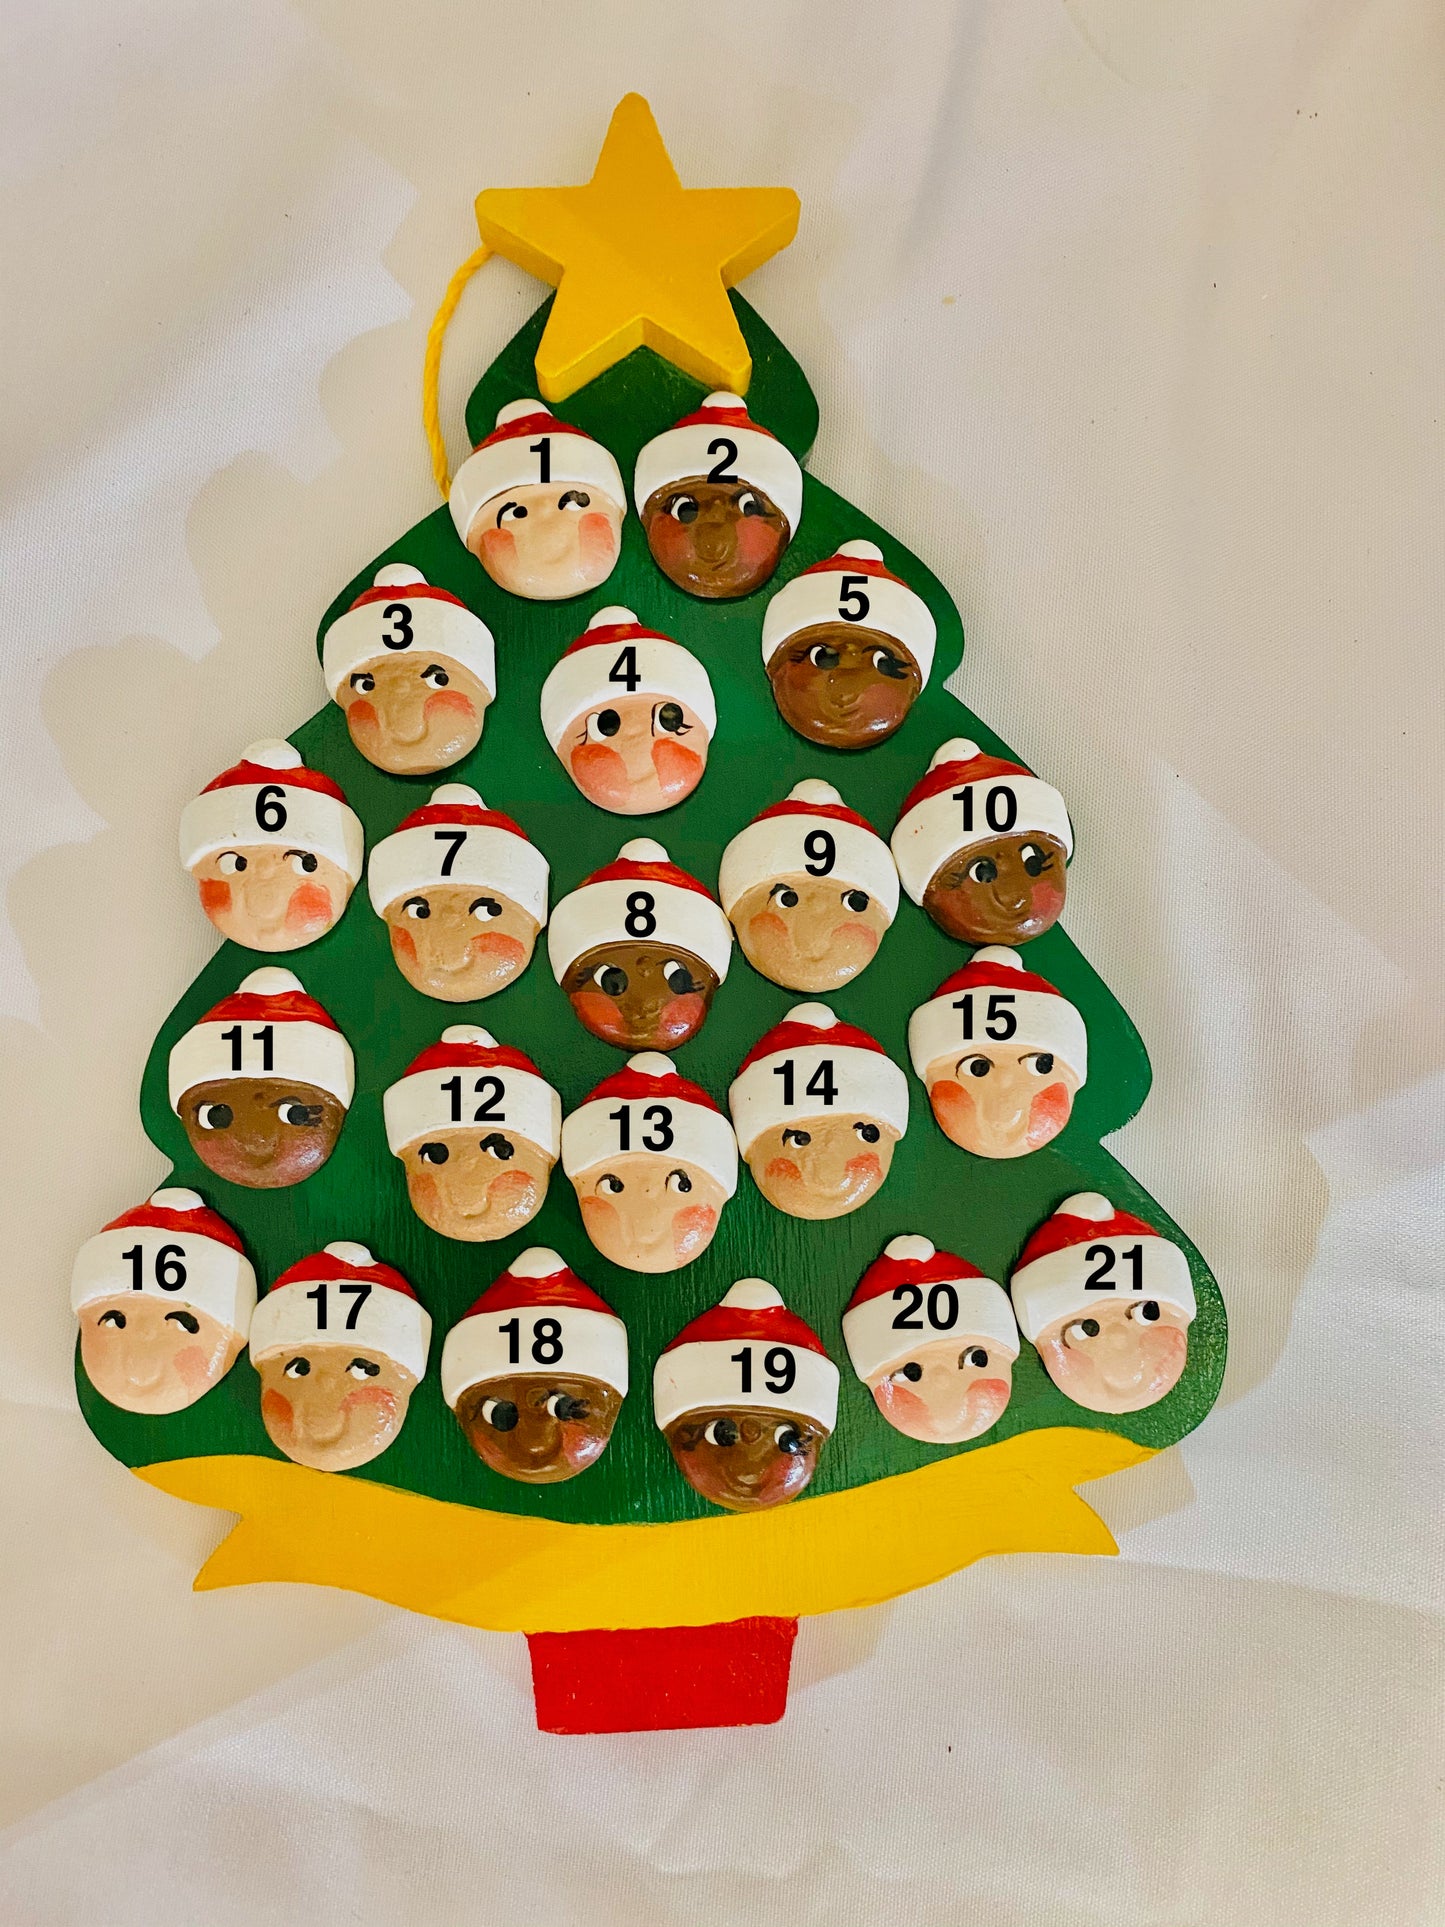 Personalized Ornament 21 Santa Faces on a Christmas Tree    7.5"x 6"